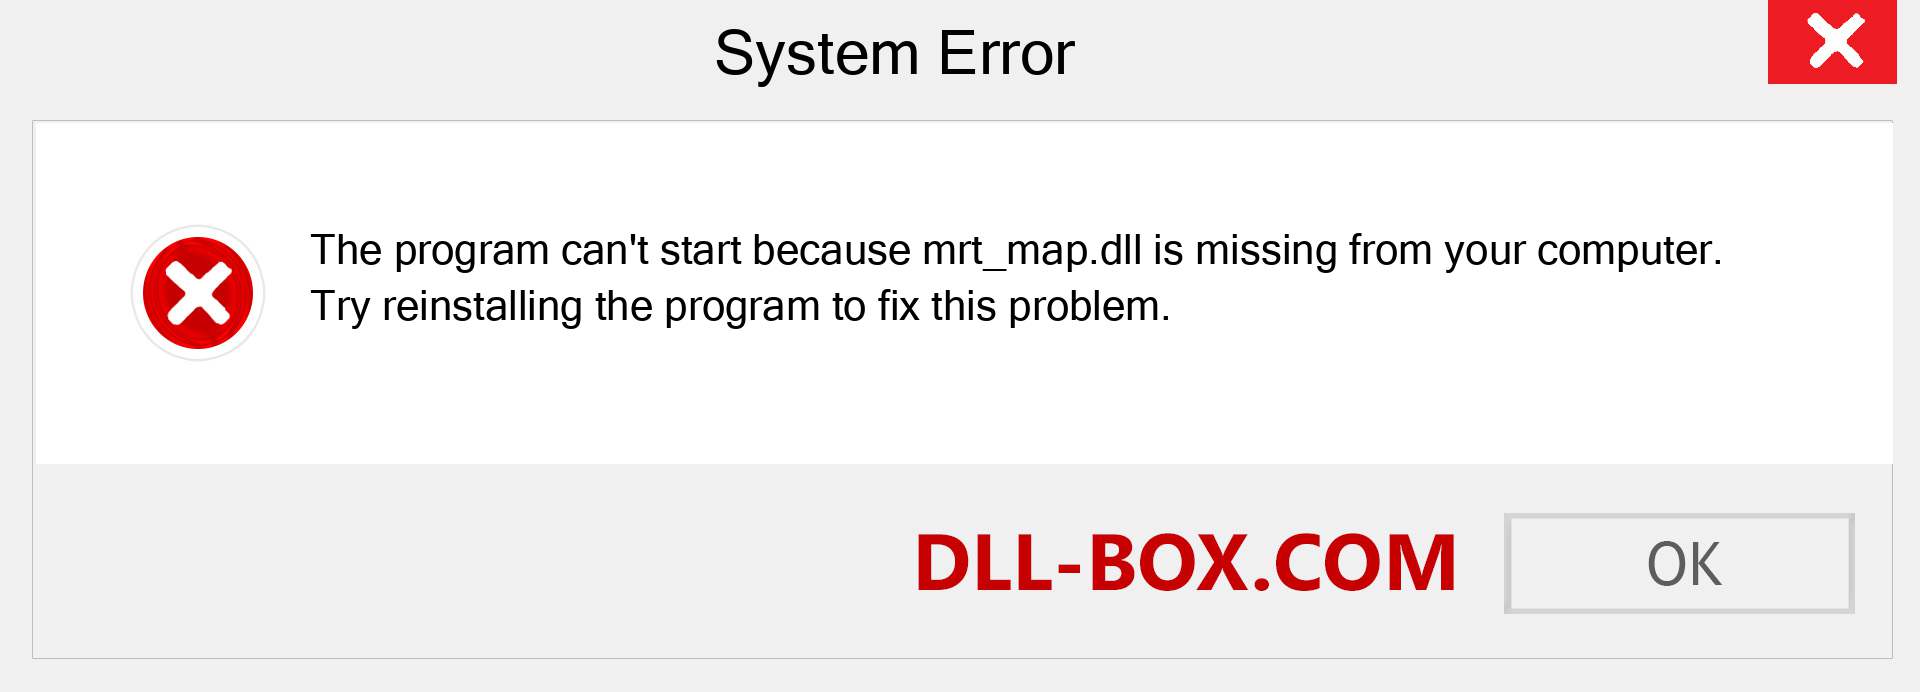  mrt_map.dll file is missing?. Download for Windows 7, 8, 10 - Fix  mrt_map dll Missing Error on Windows, photos, images